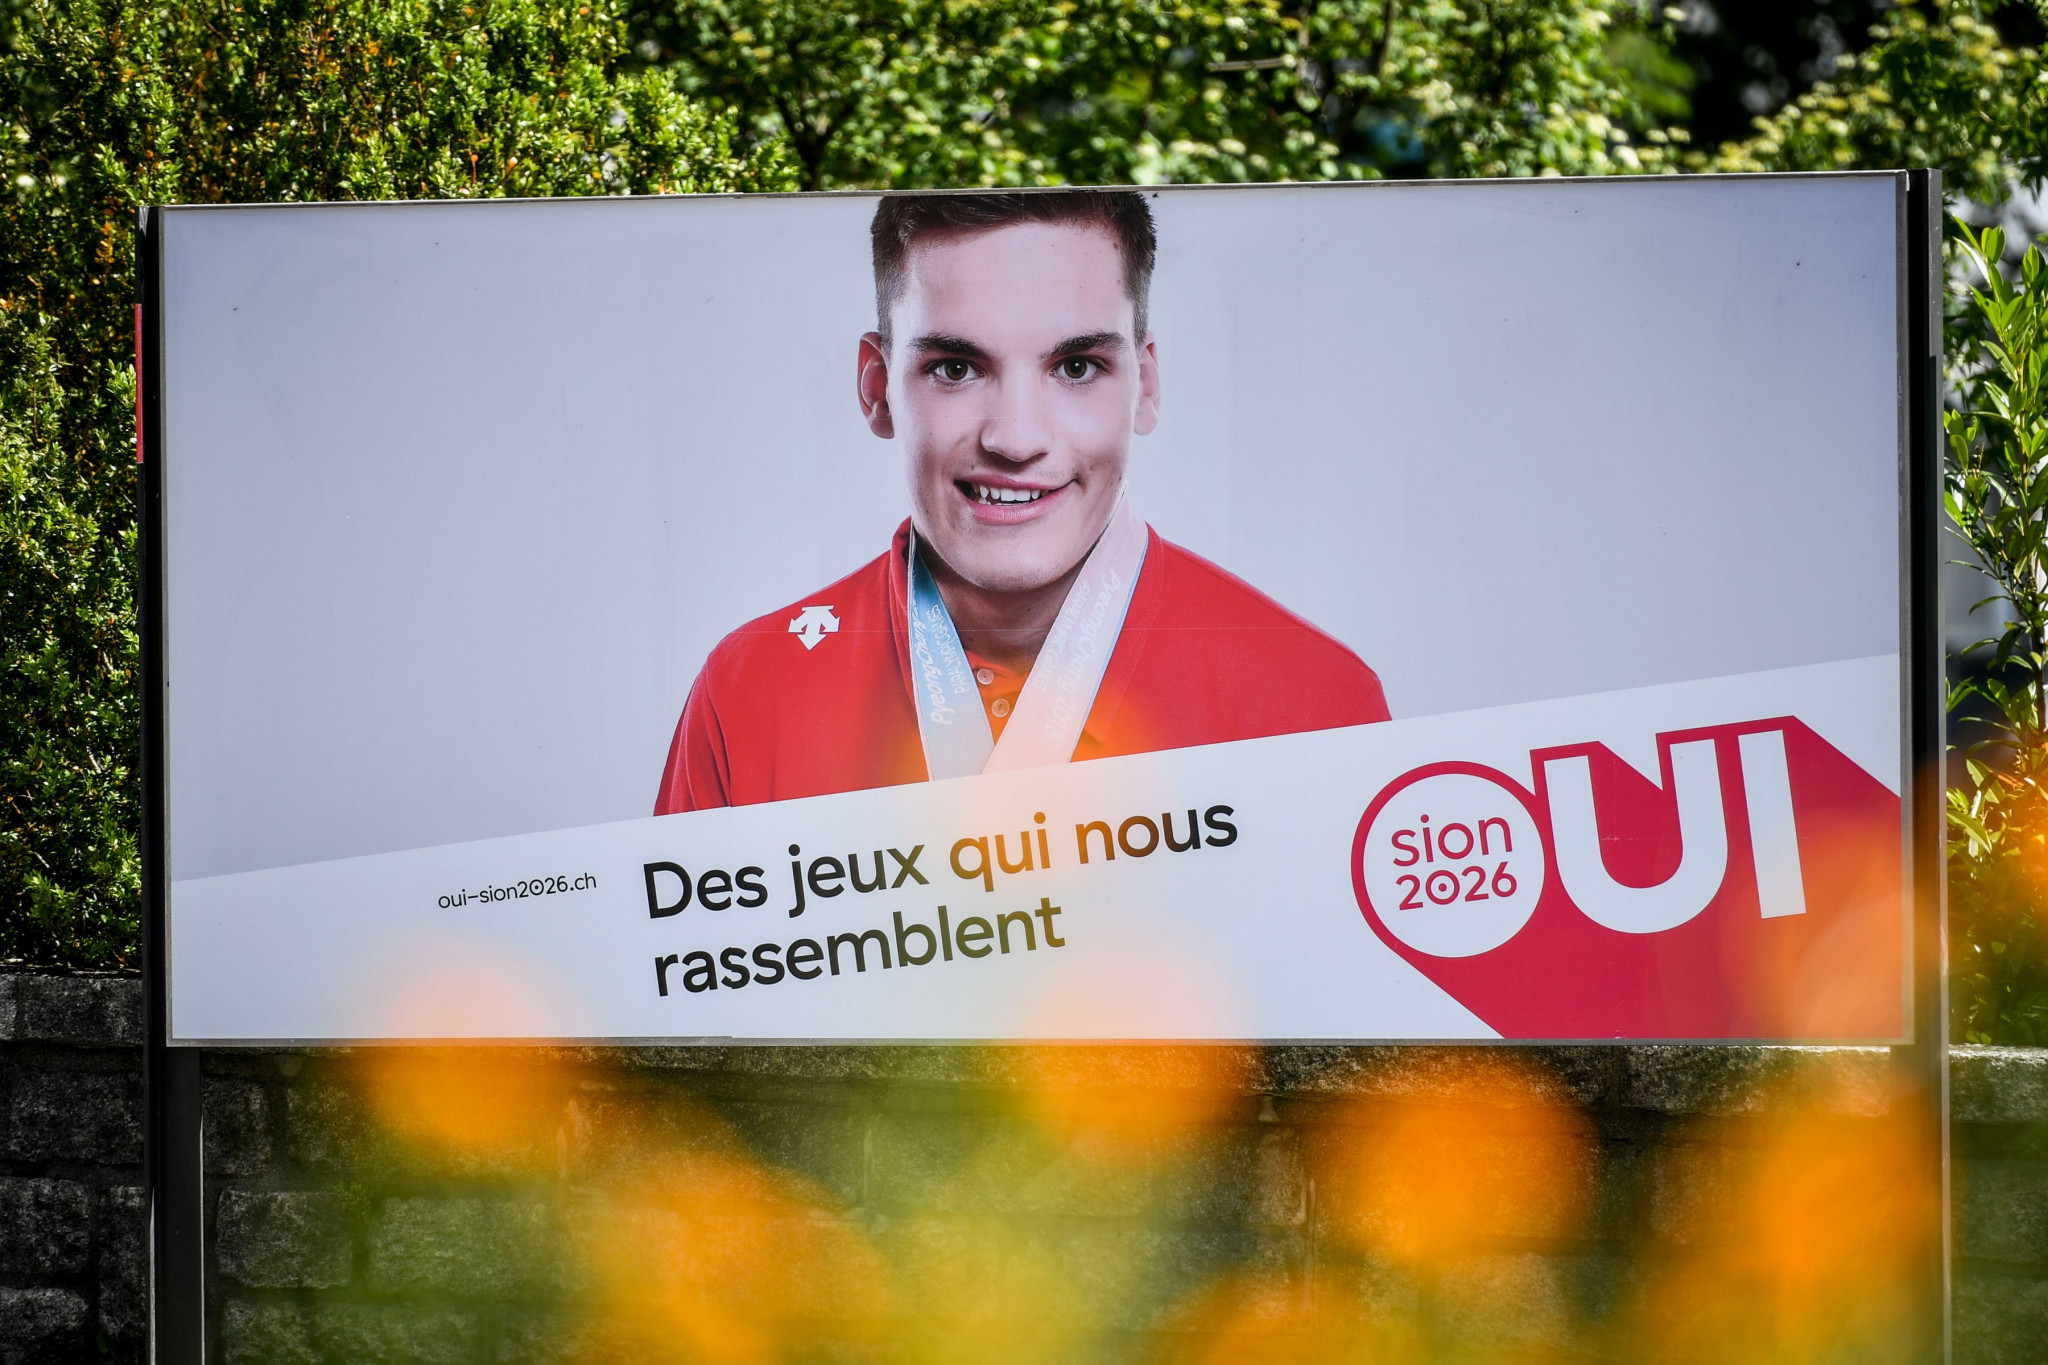 An electoral placard in favour of Sion's campaign to host the 2026 Games ©Getty Images